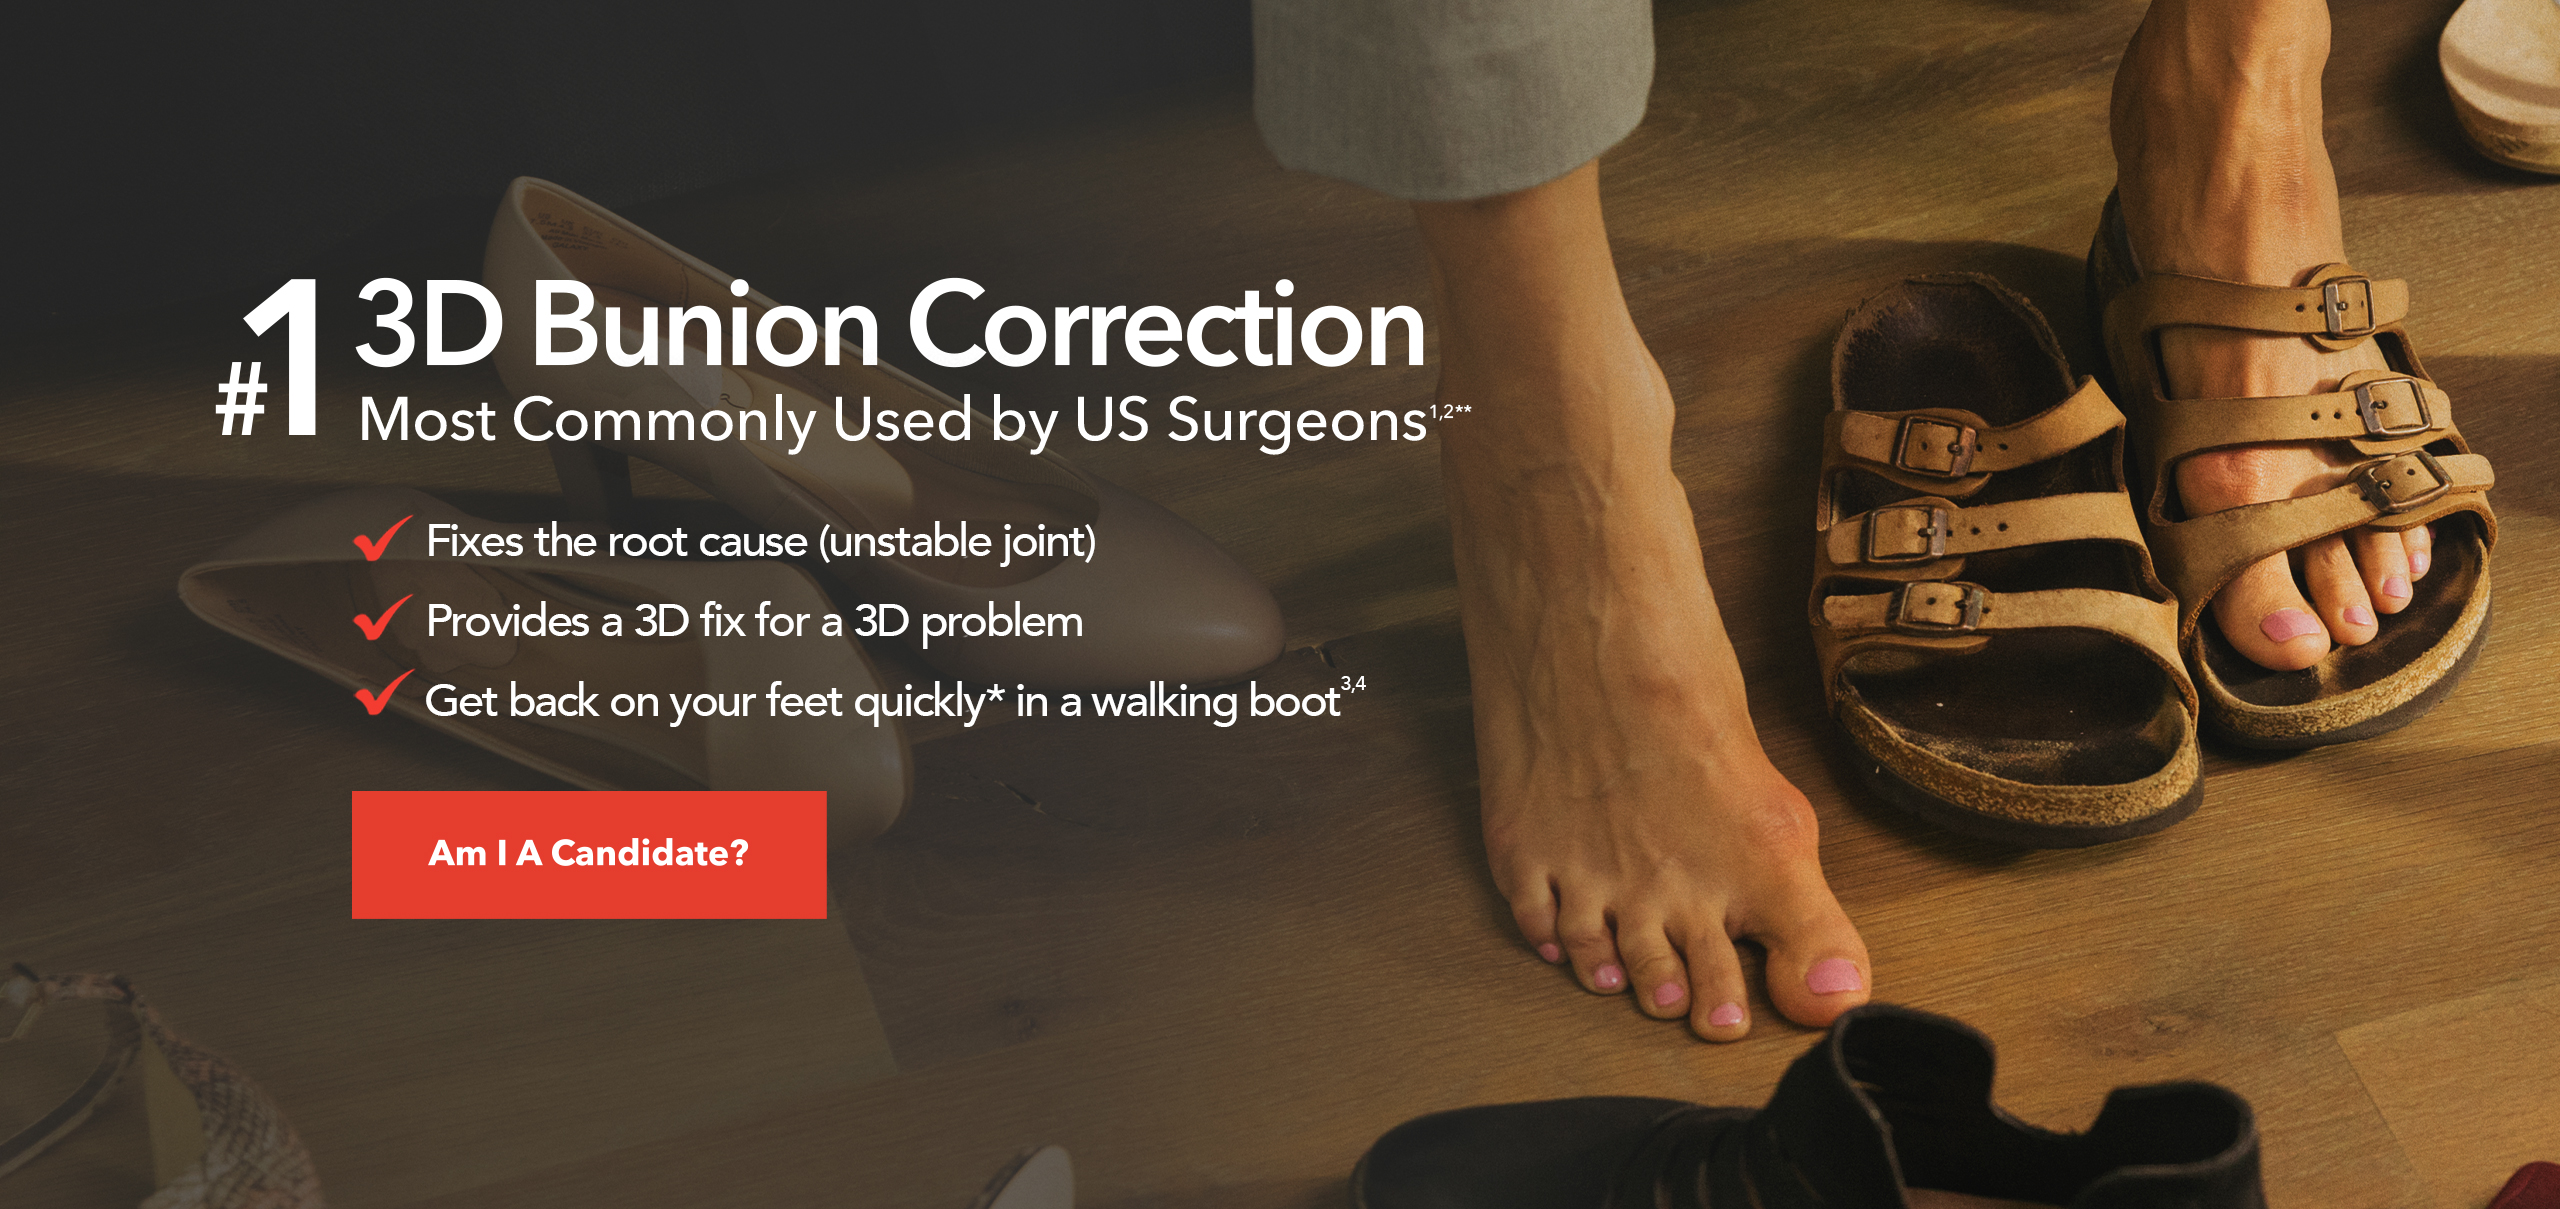 Image of a person's bare foot taken out of a nearby sandal to show the size of the bunion visible on the base of the big toe, paired with a headline about Lapiplasty® reading 